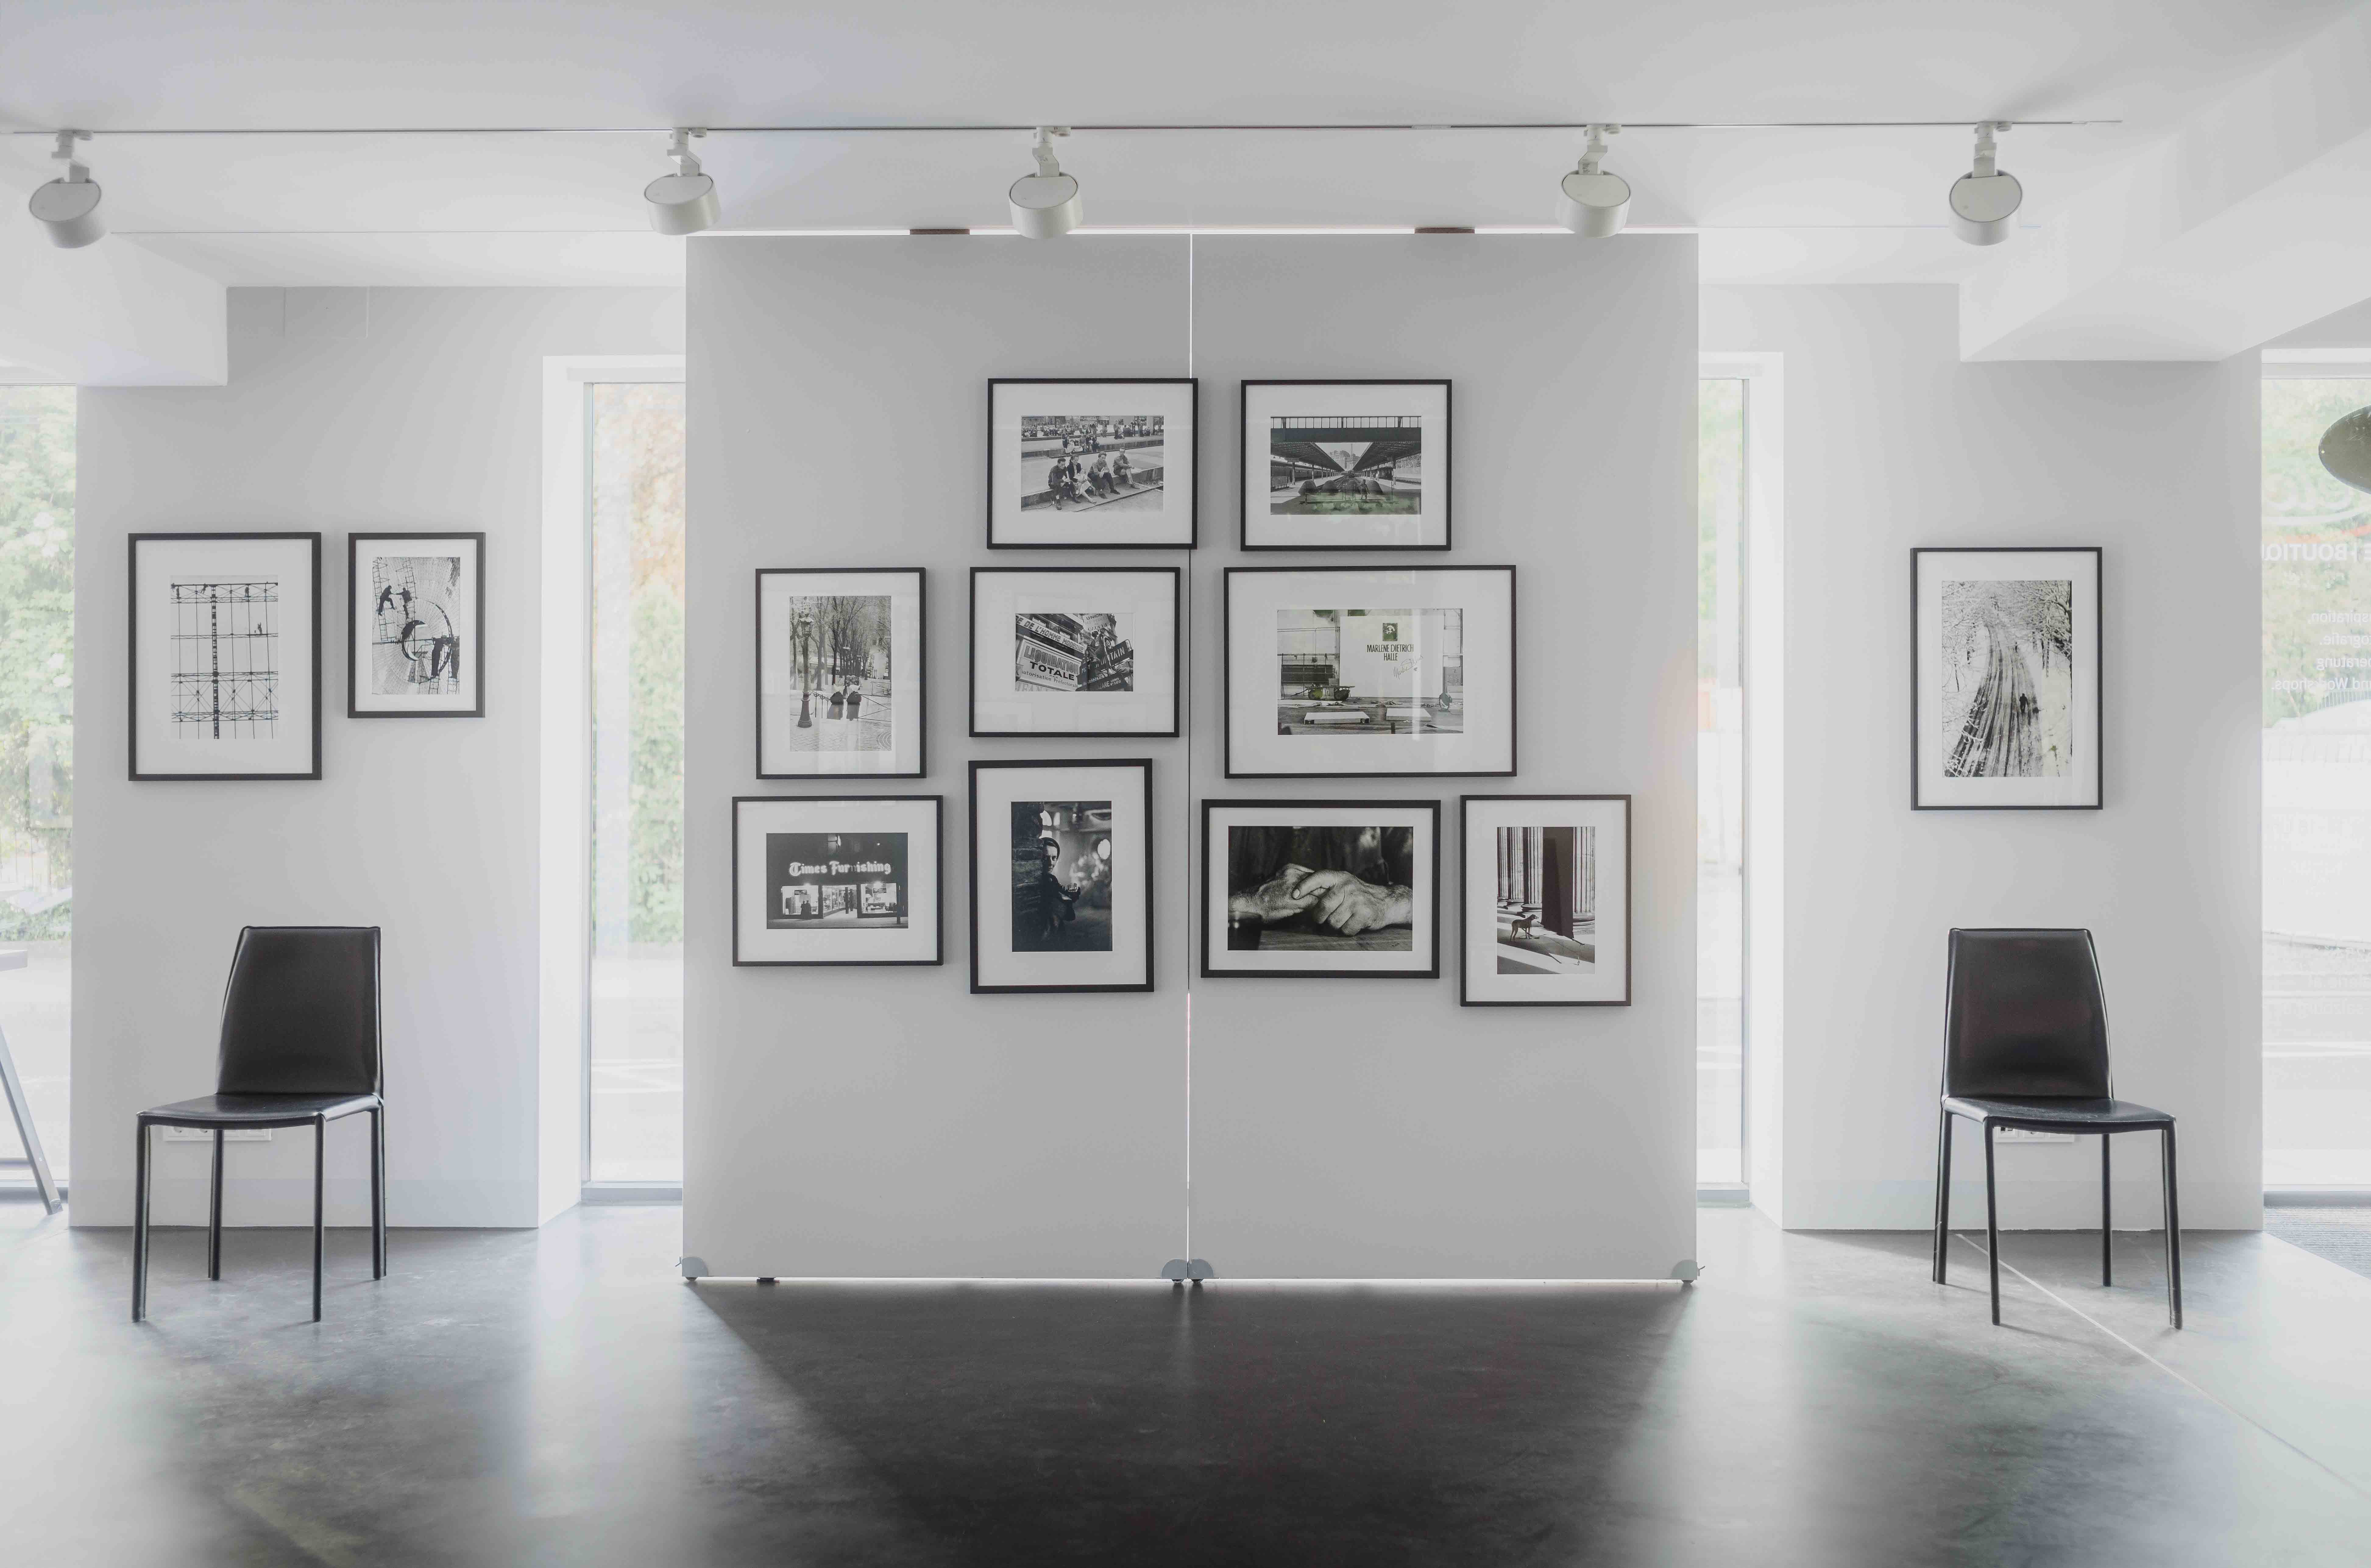 LEICA GALLERY - "THE ART OF SEEING" - Jean Marquis Exhibition